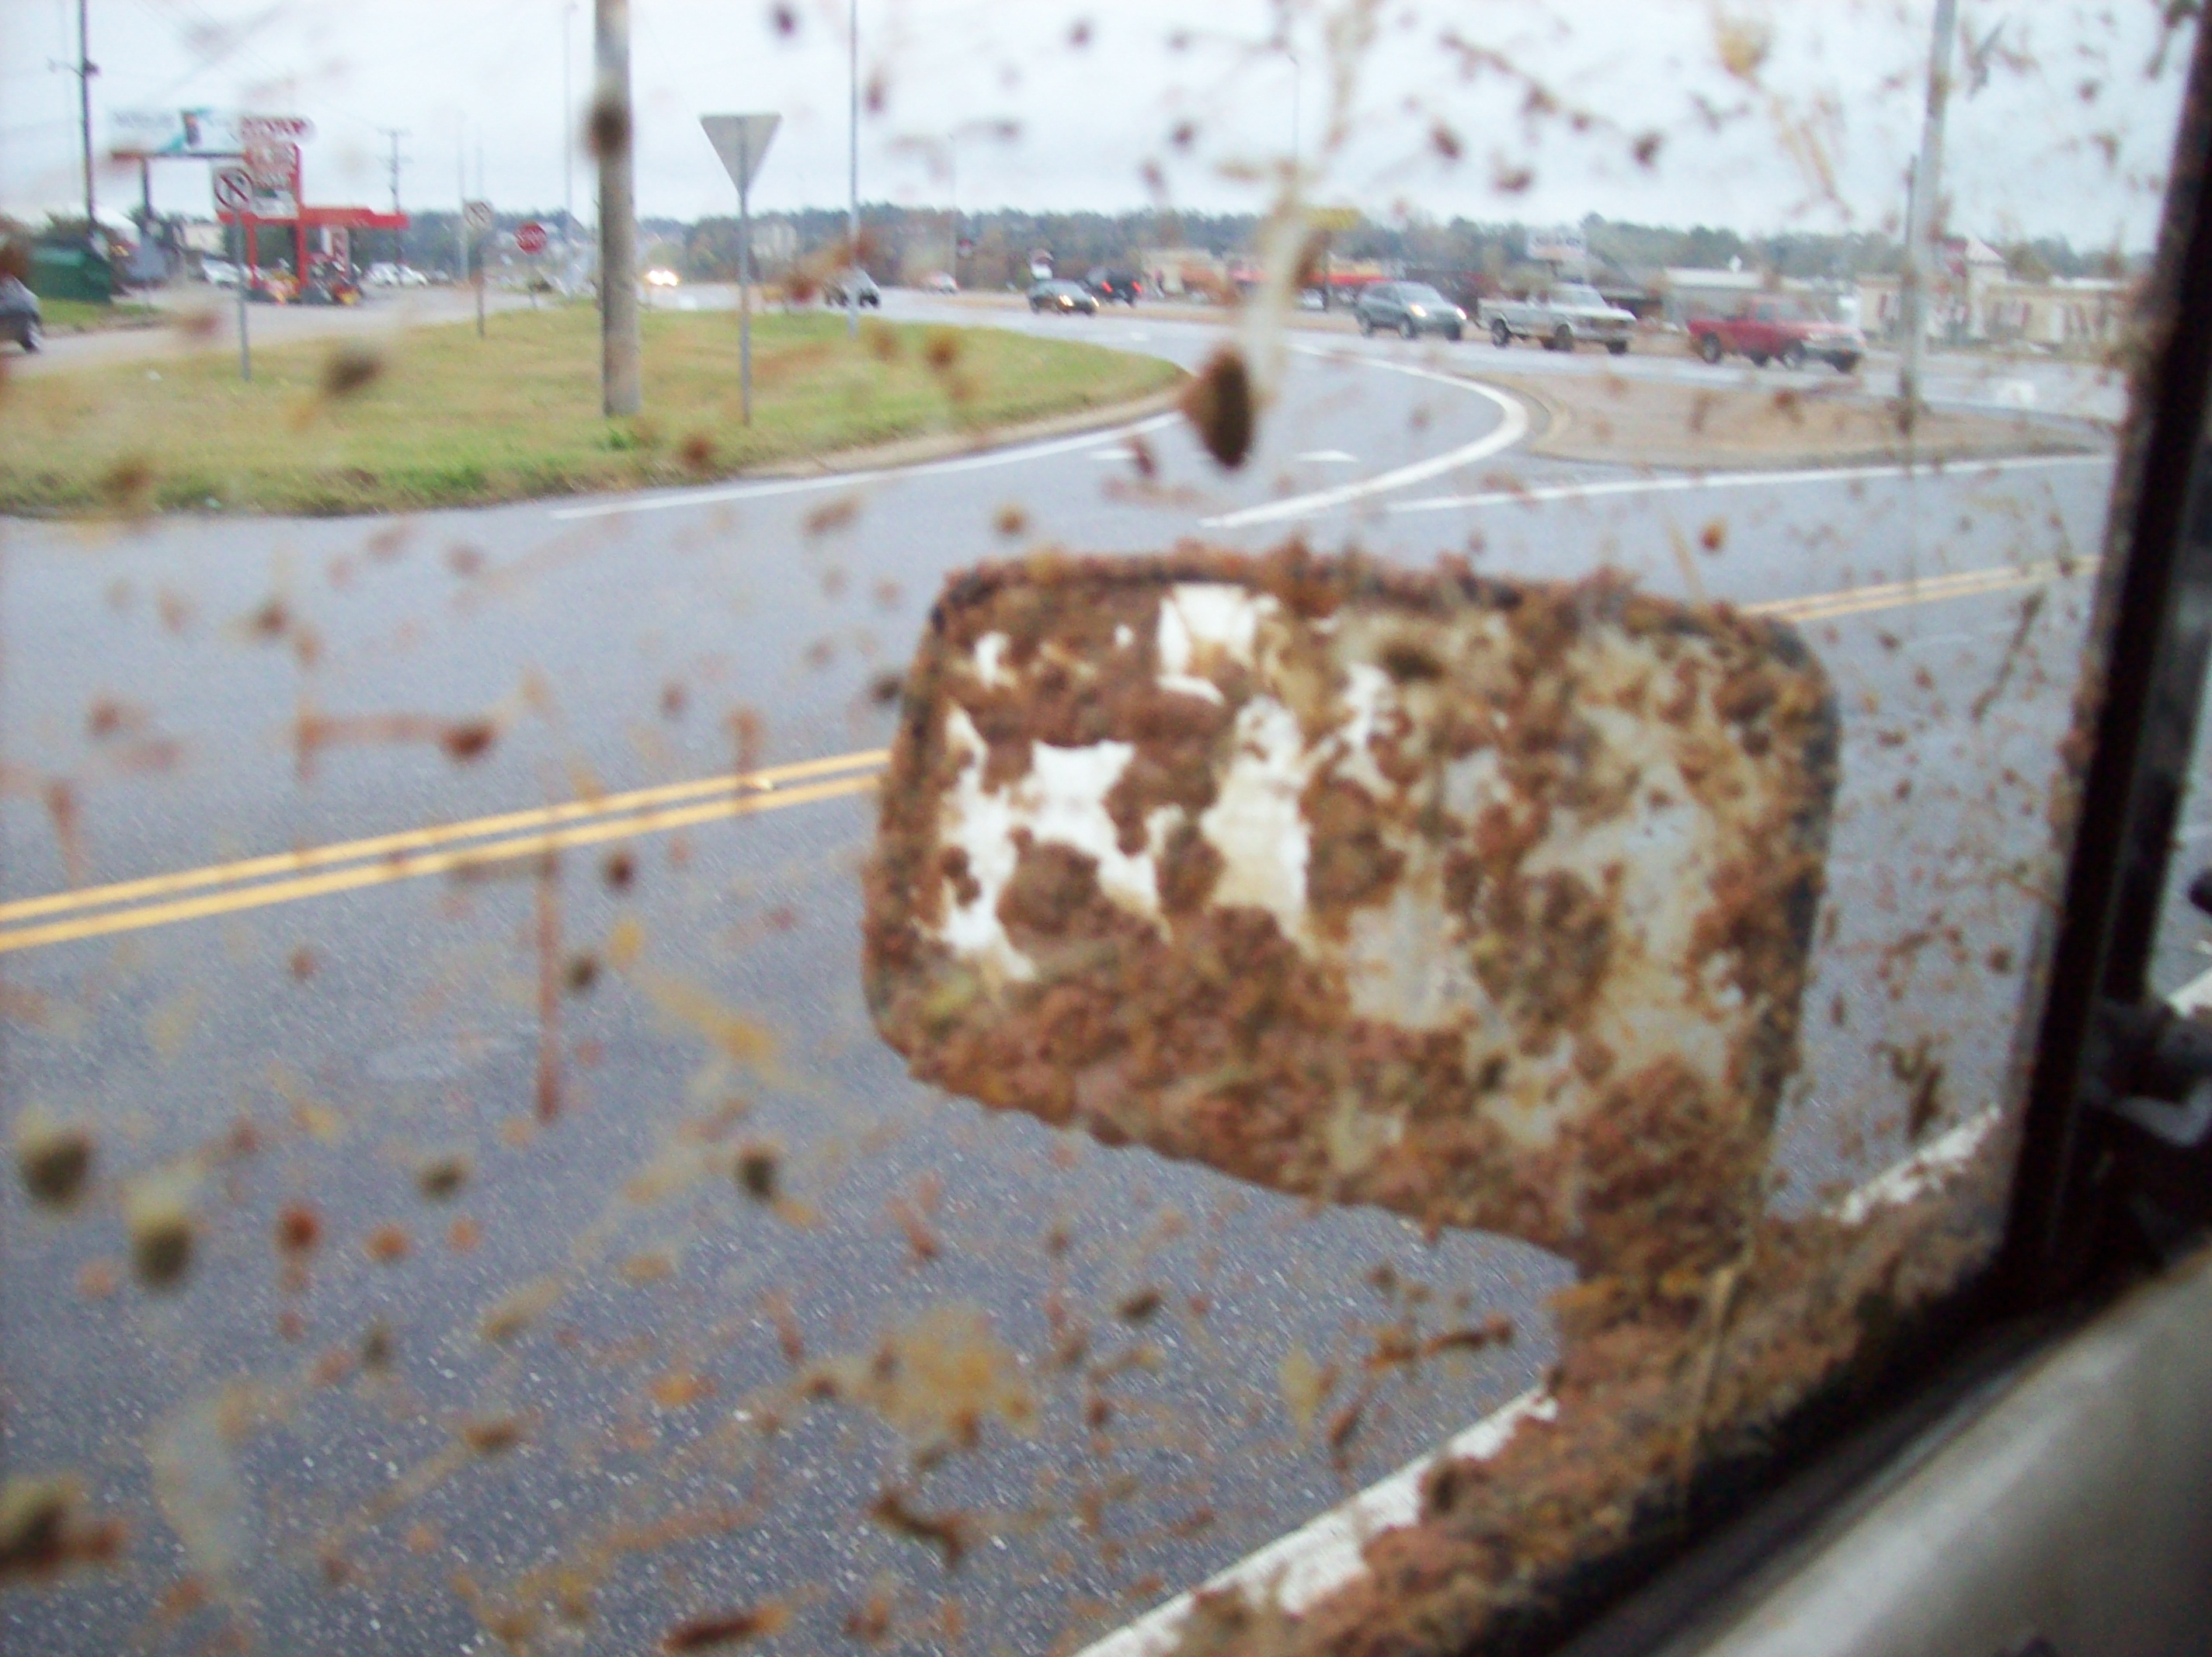 WARNING! OBJECTS IN MIRROR MAY BE MUDDIER THAN THEY APPEAR!